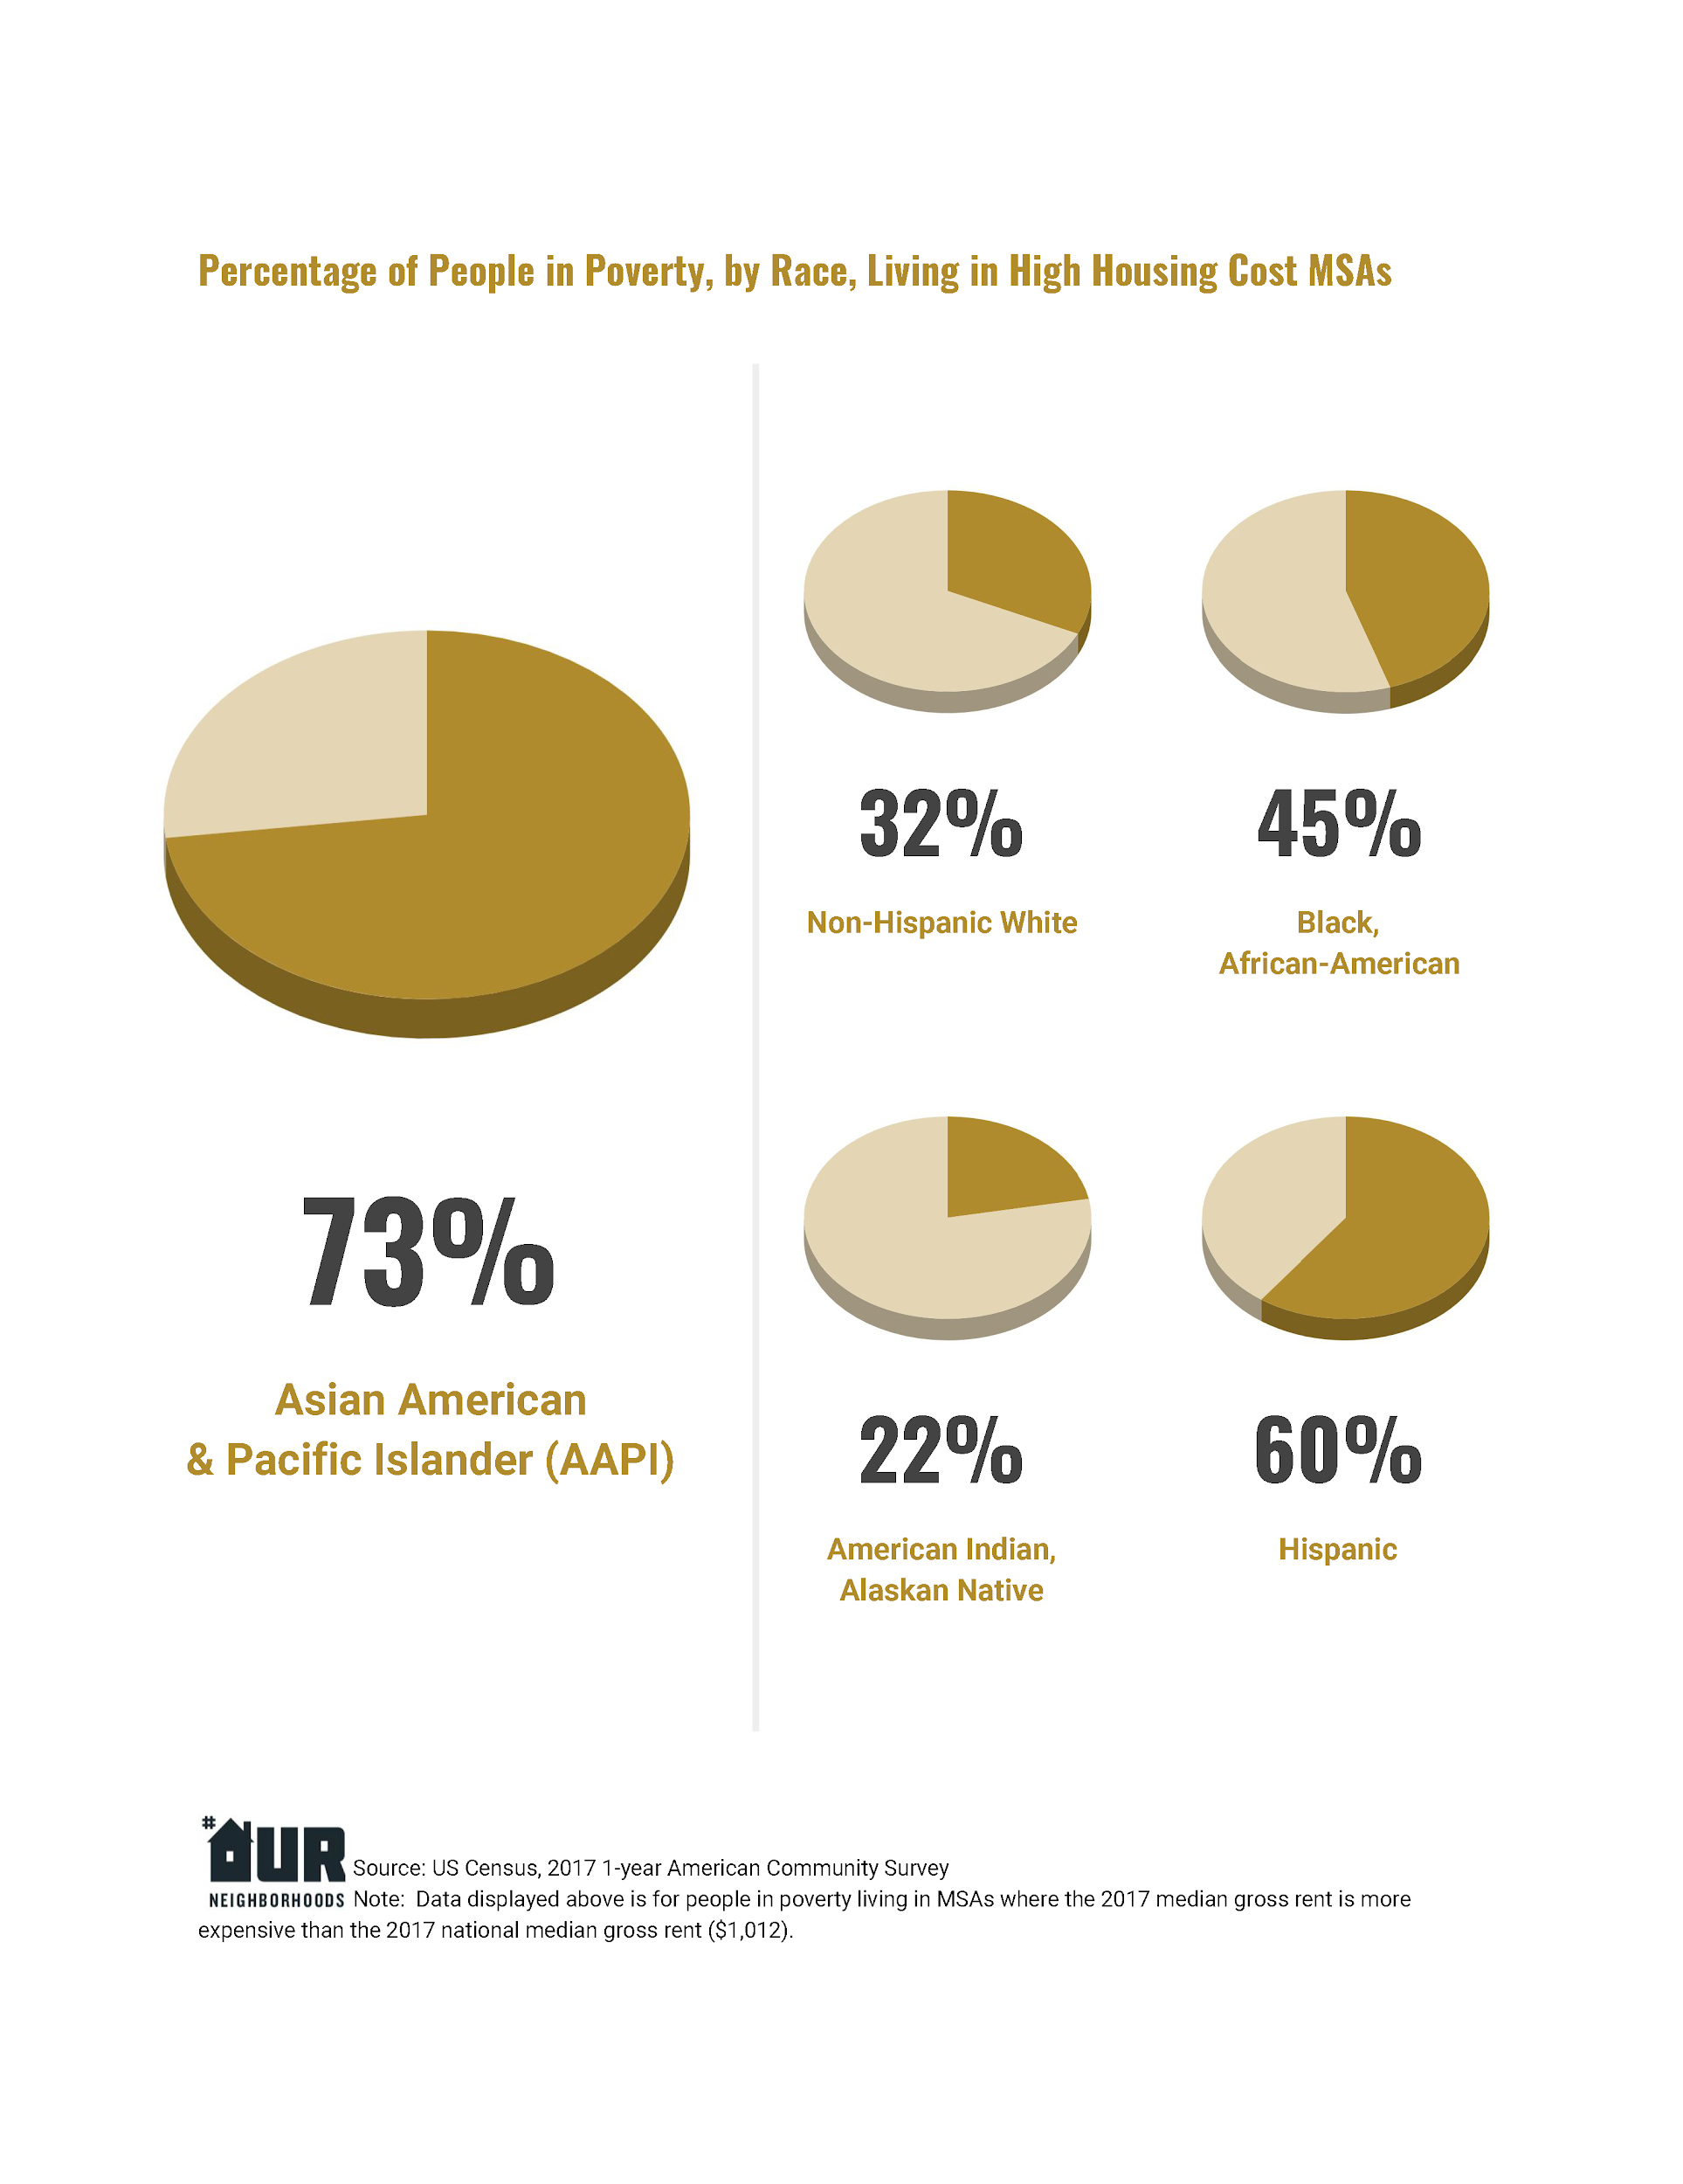 Pie charts showing the percentage of people in poverty, by race, living in high housing cost MSAs